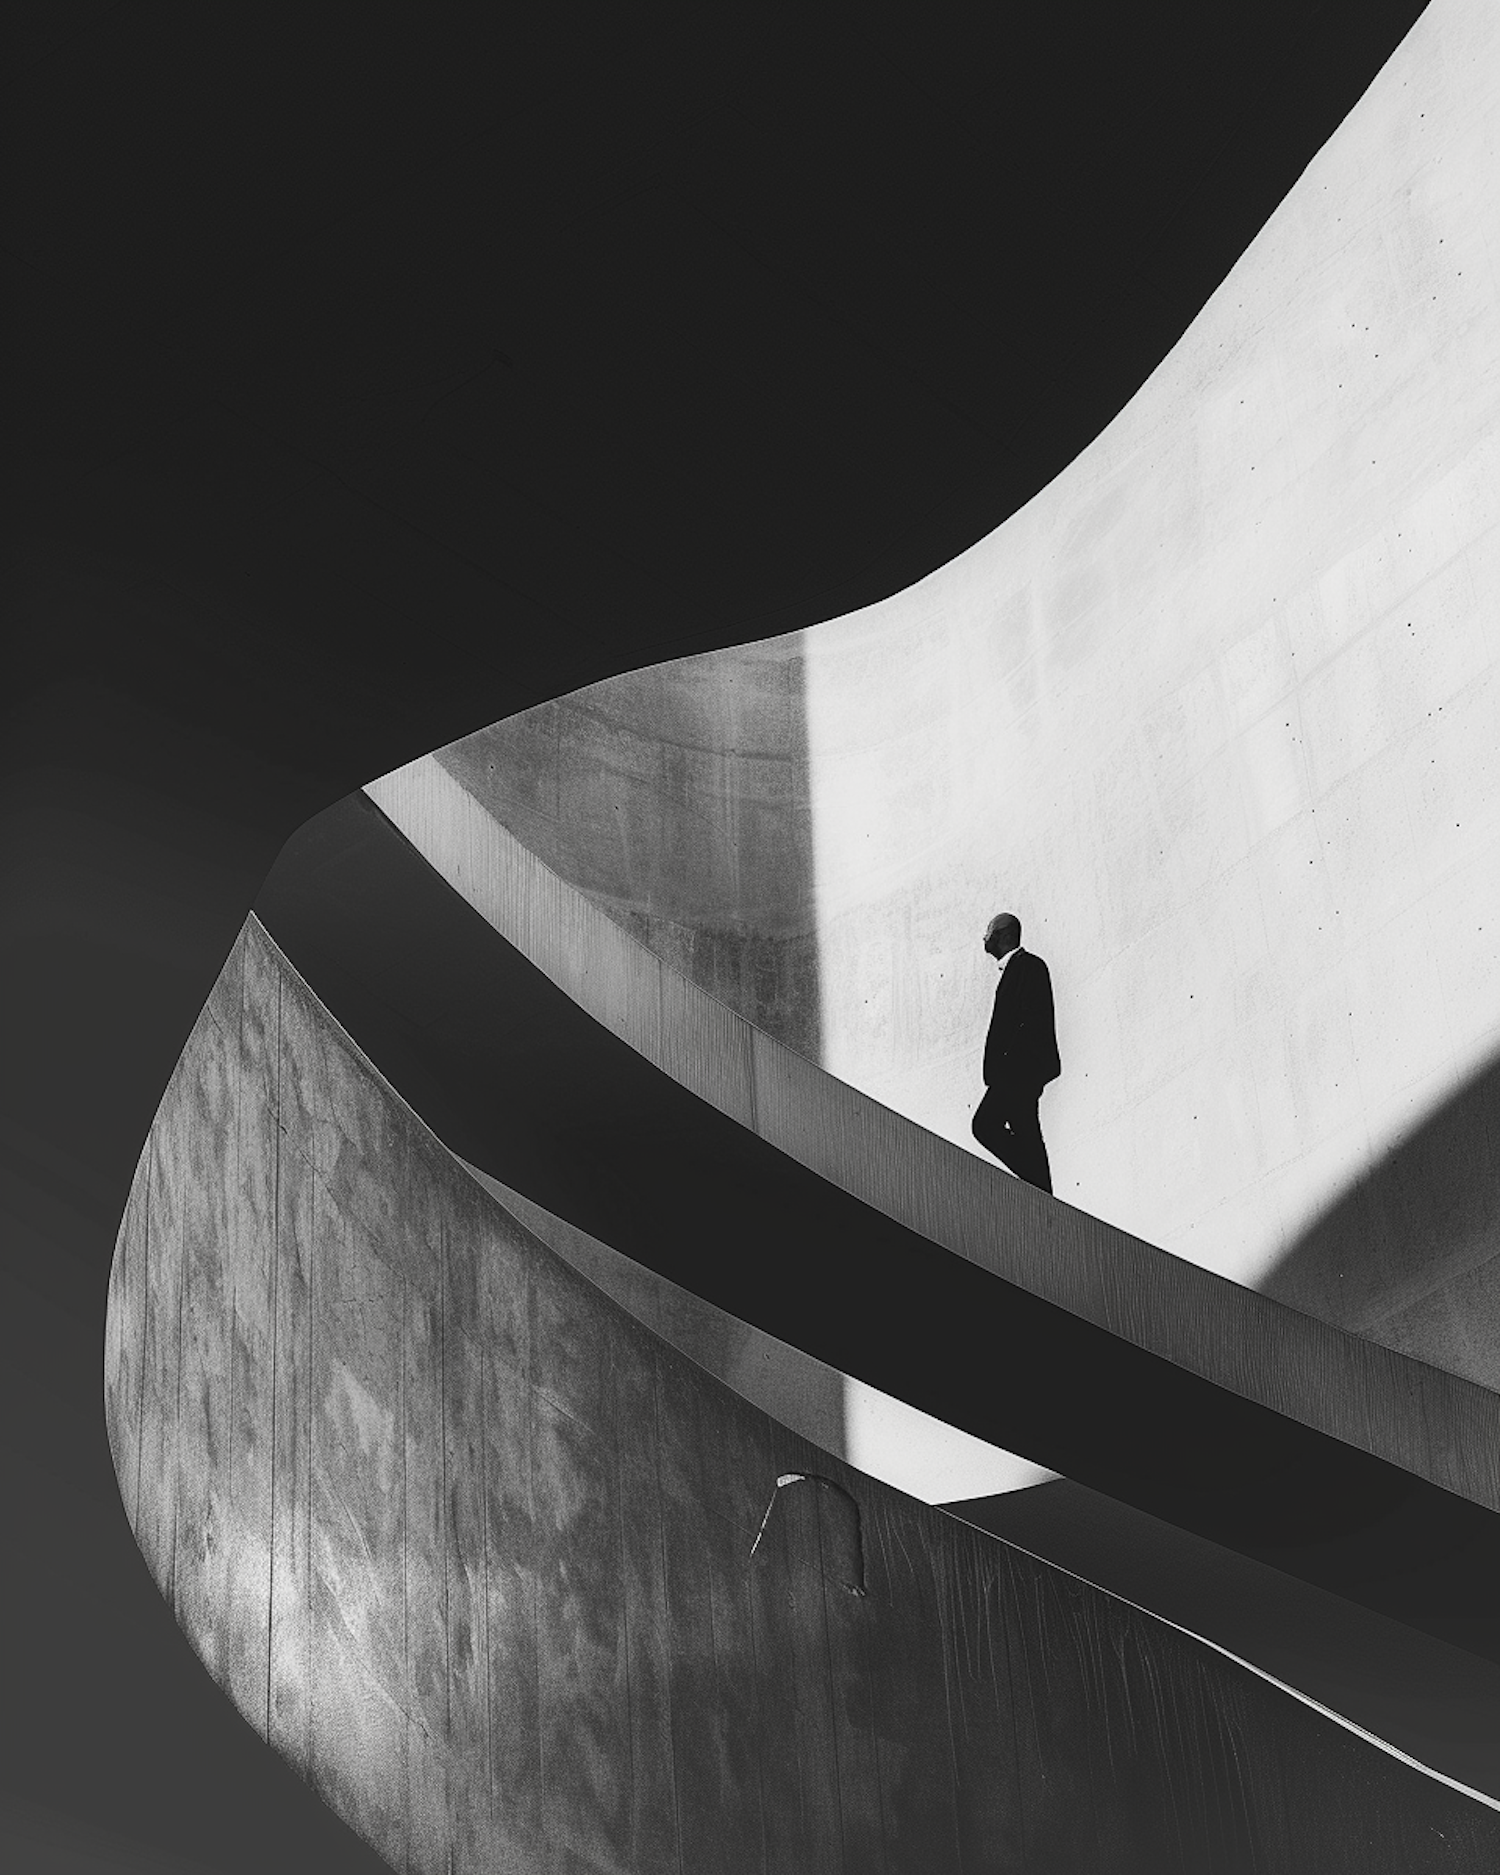 Solitude in Curves: Man and Concrete